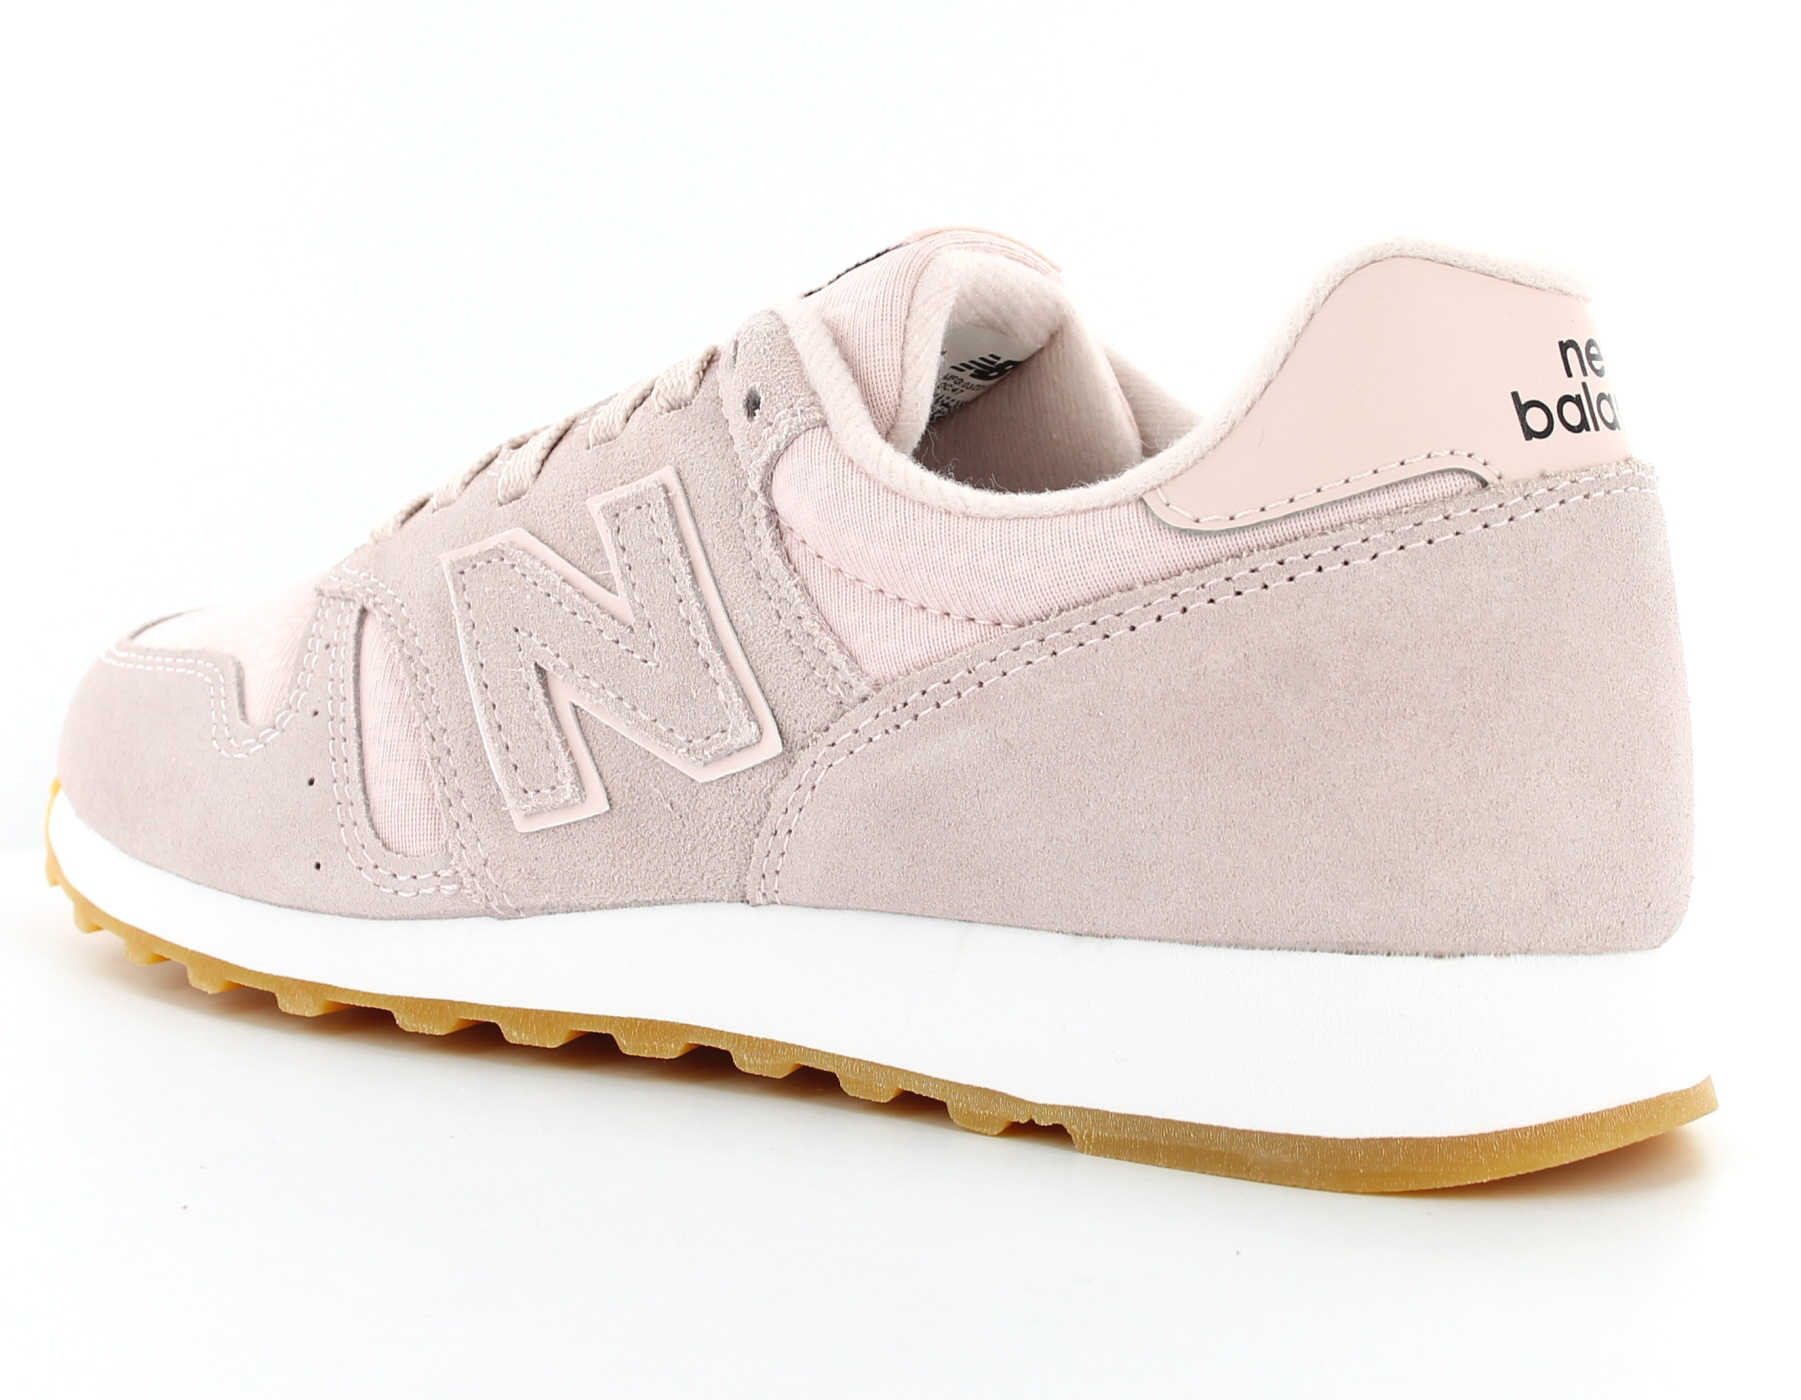 New Balance 373 Femme Suede Rose-Gomme